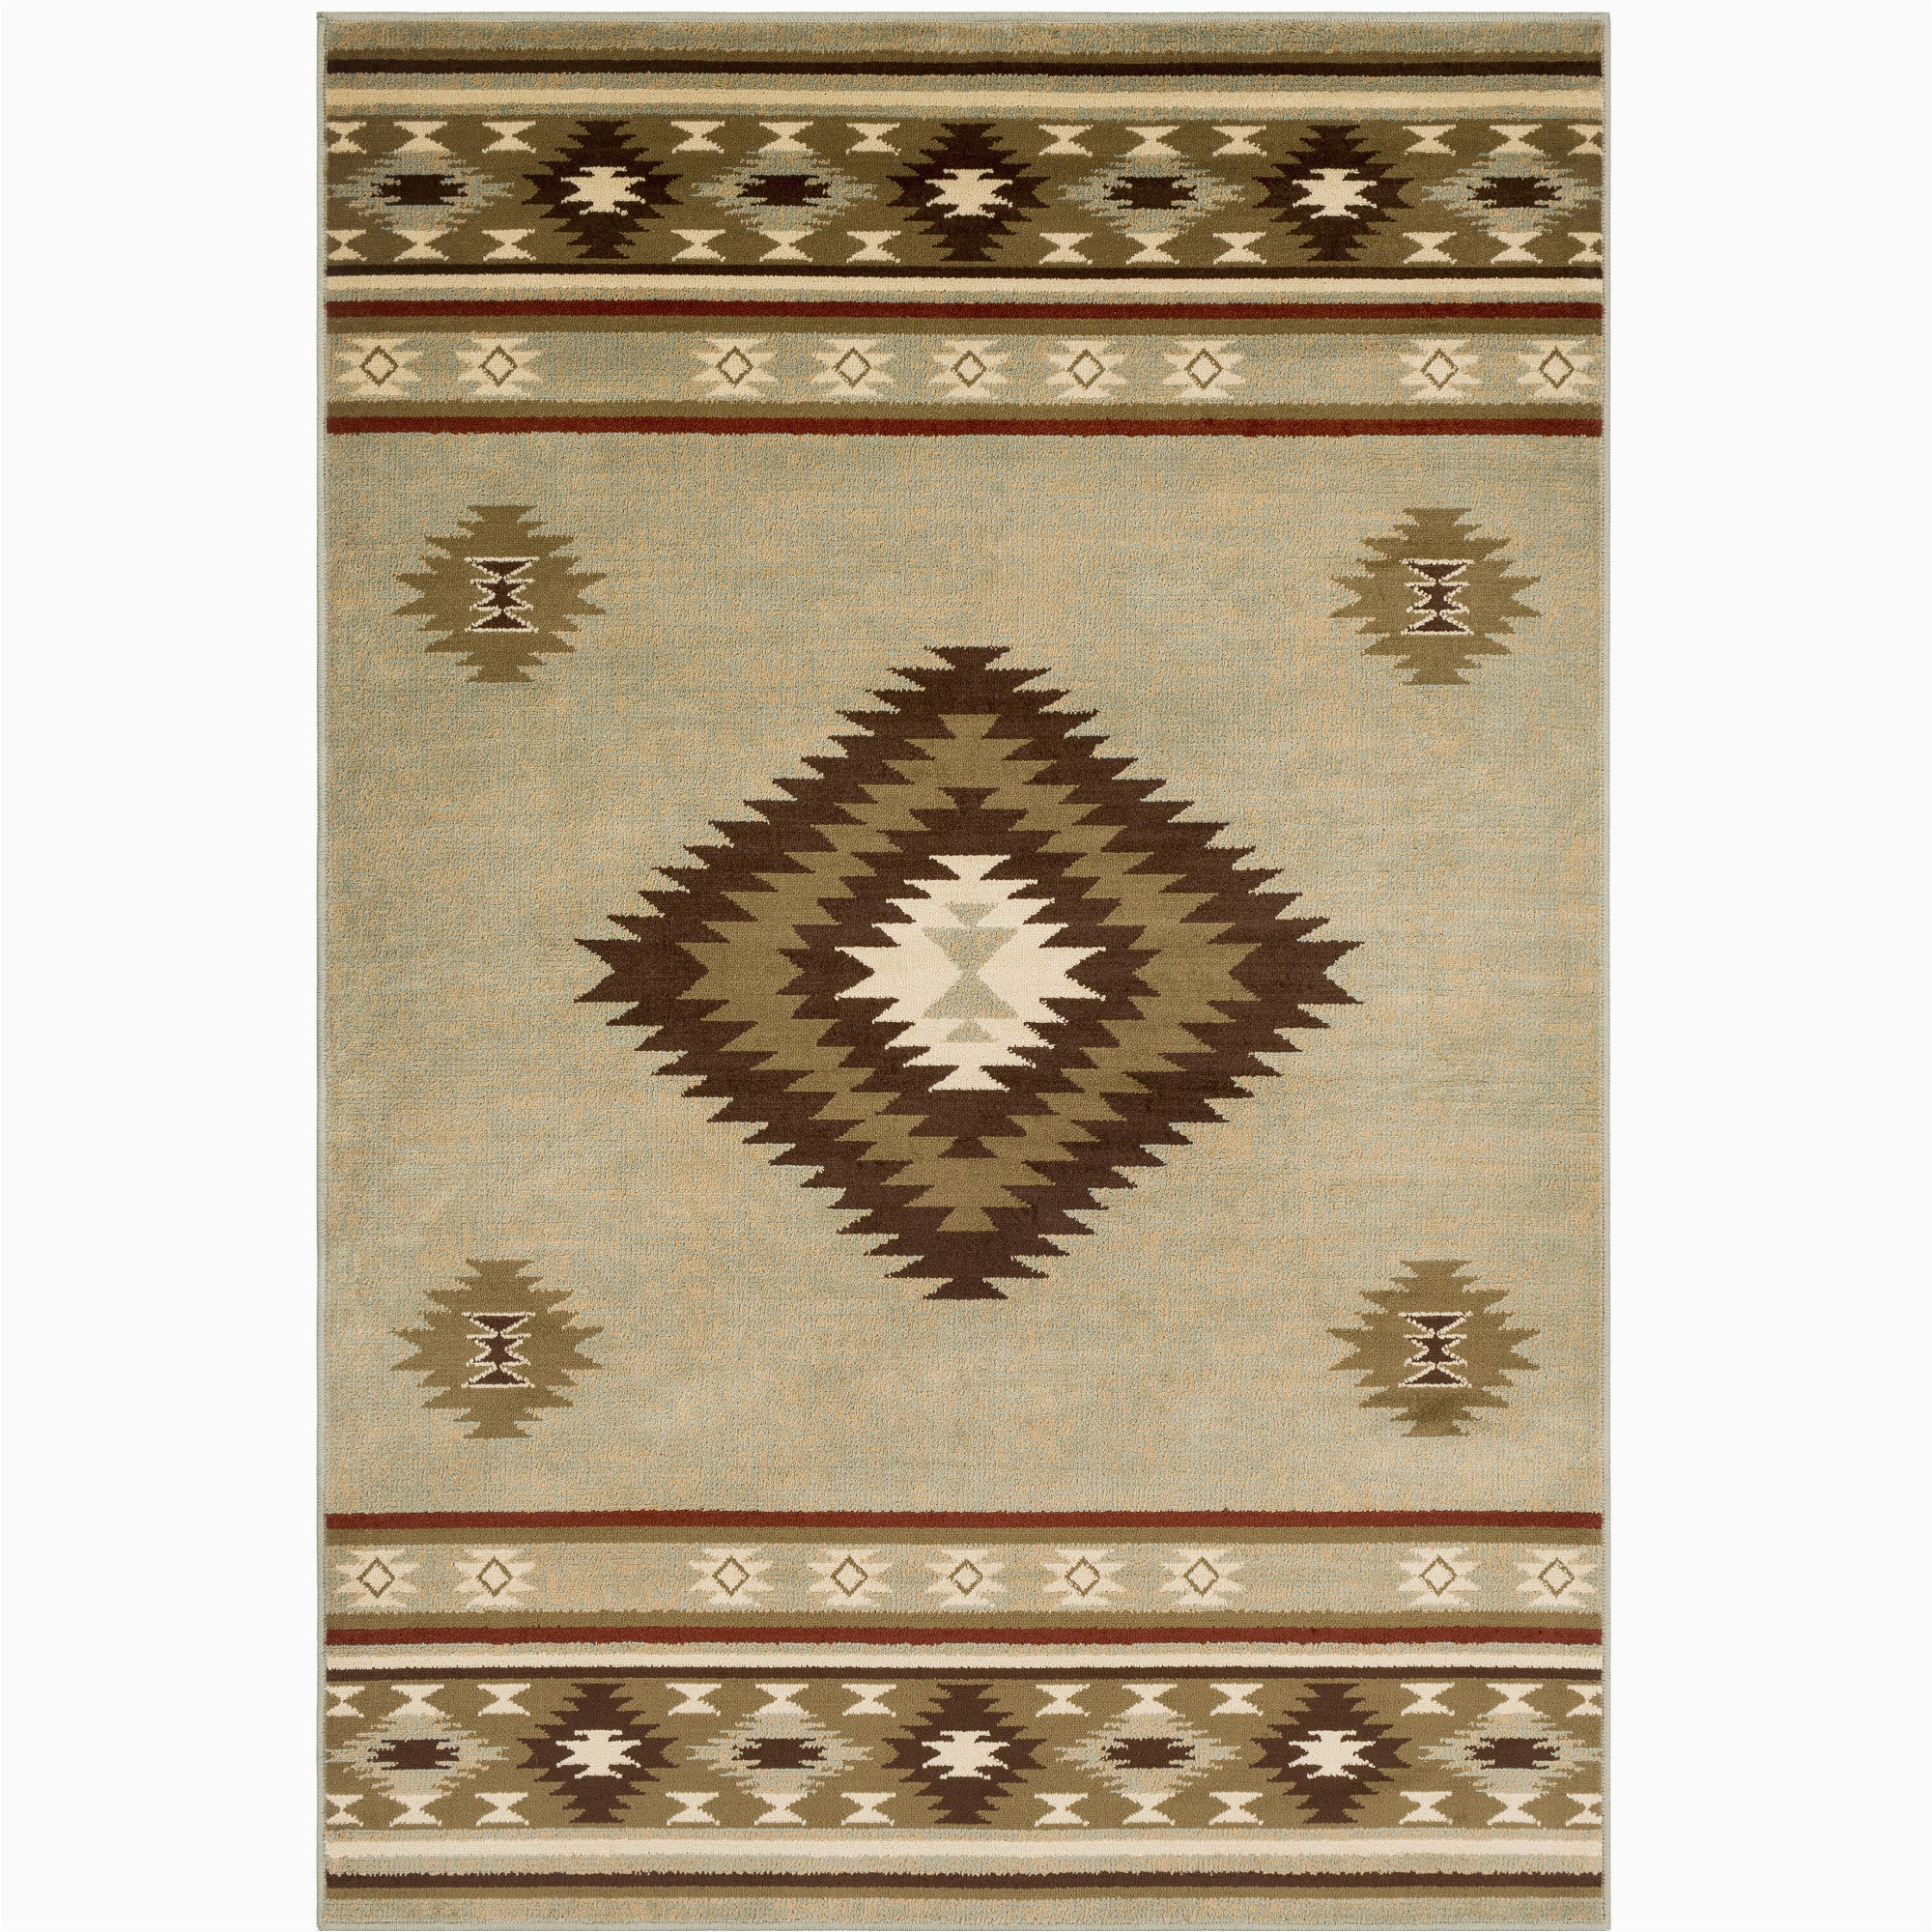 Sage Green and Beige area Rugs 79 X 112 southwestern Kilim Pattern Sage Green and